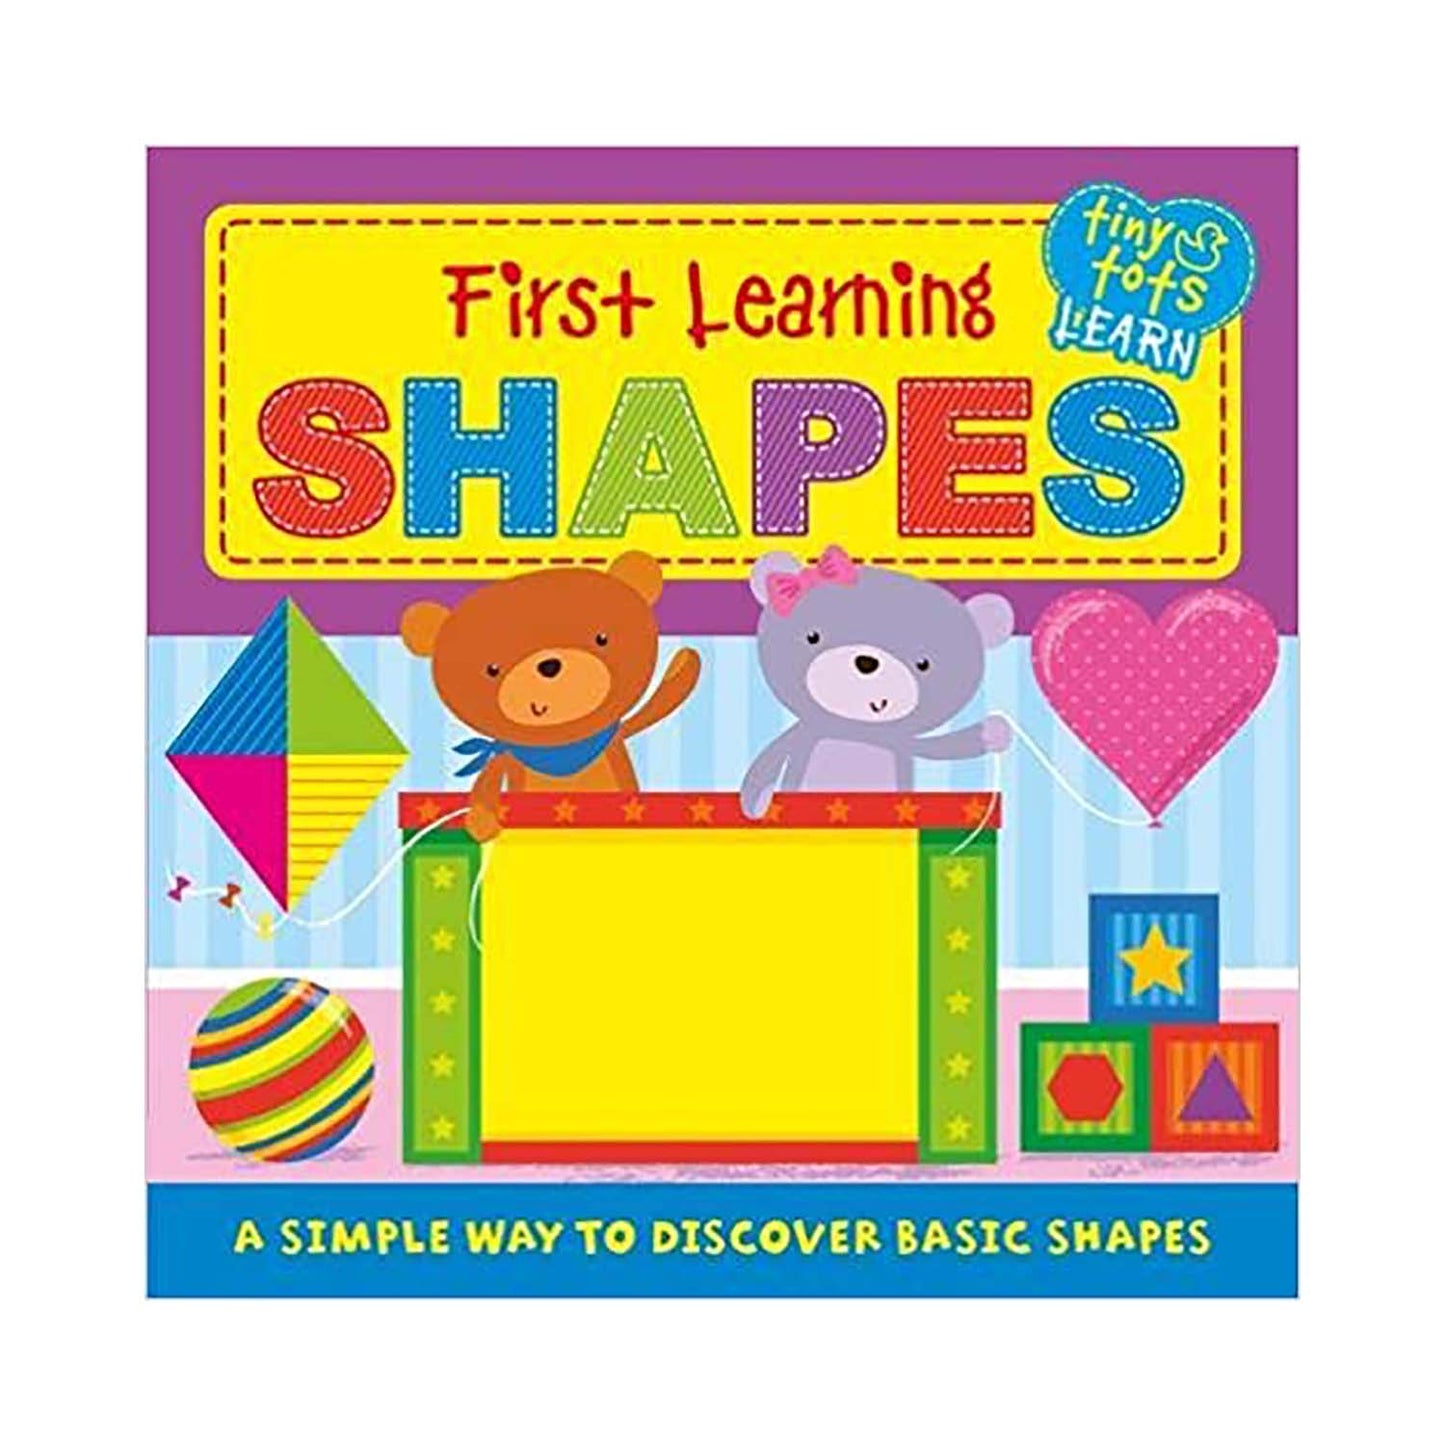 First Learning Shapes (Tiny Tots Touch Learn)